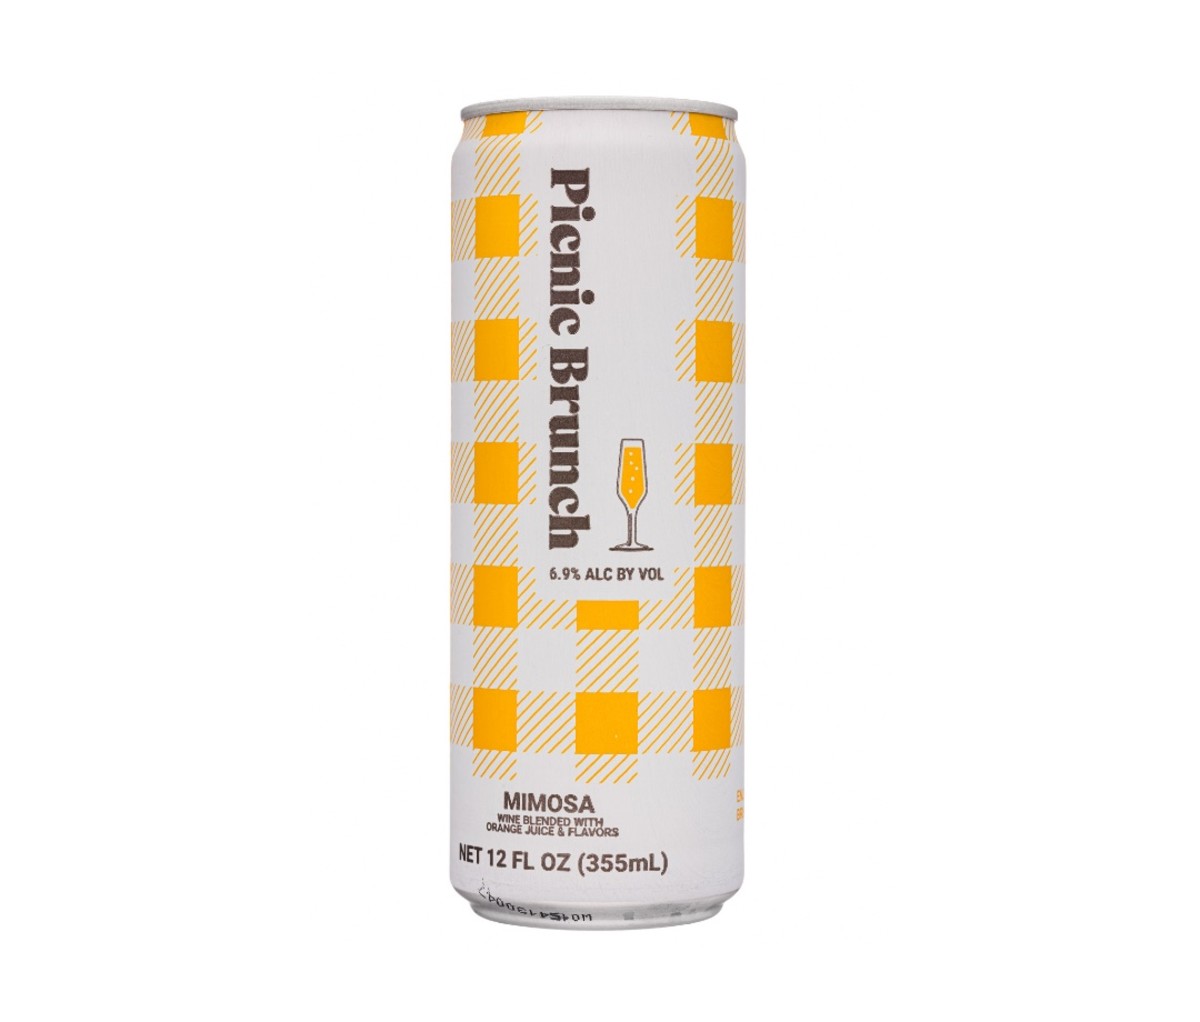 Picnic Brunch's Mimosa is one of the summer's best canned cocktails.